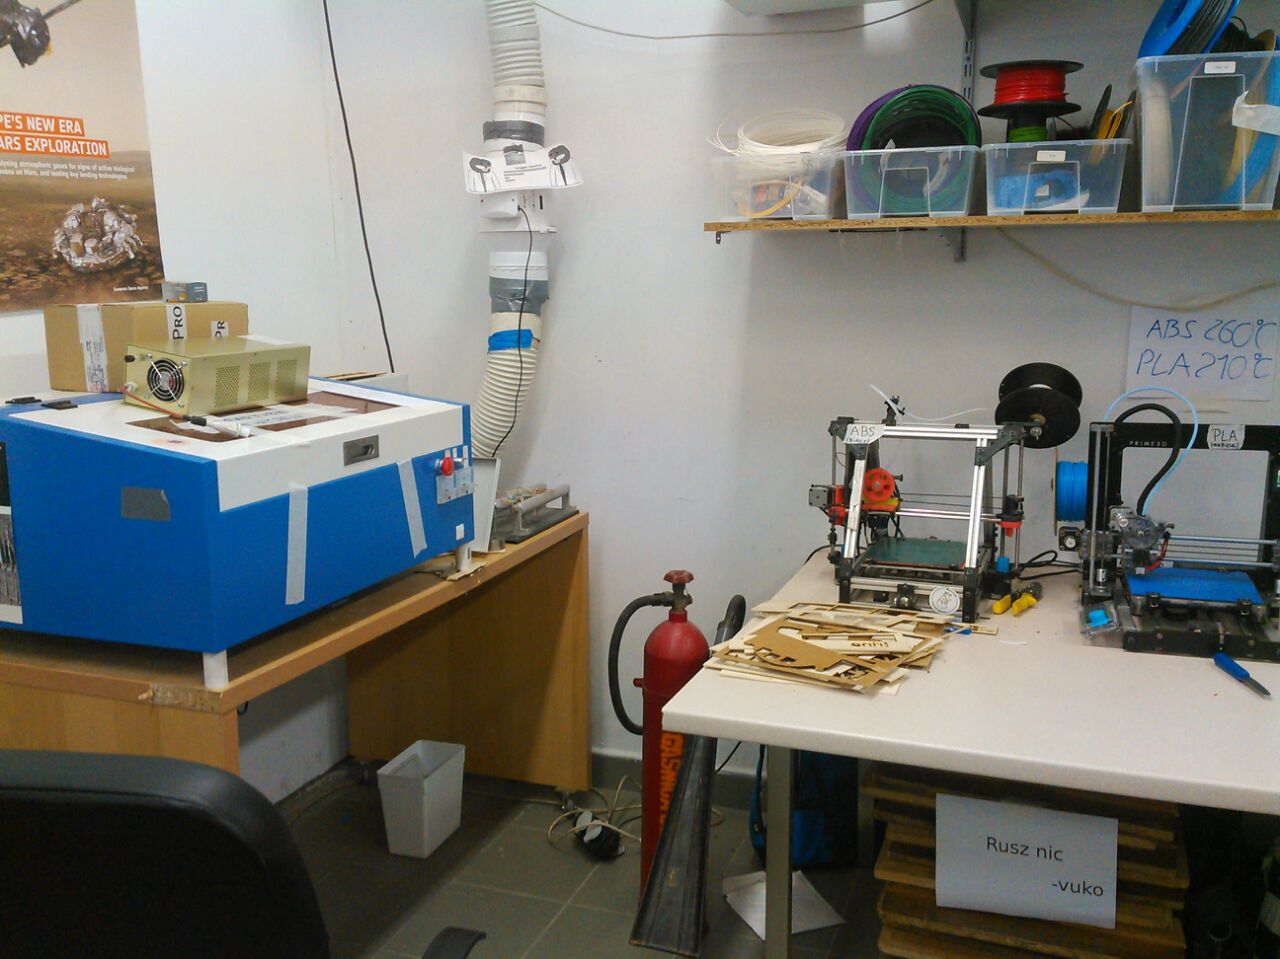 Laser cutter and 3D printers